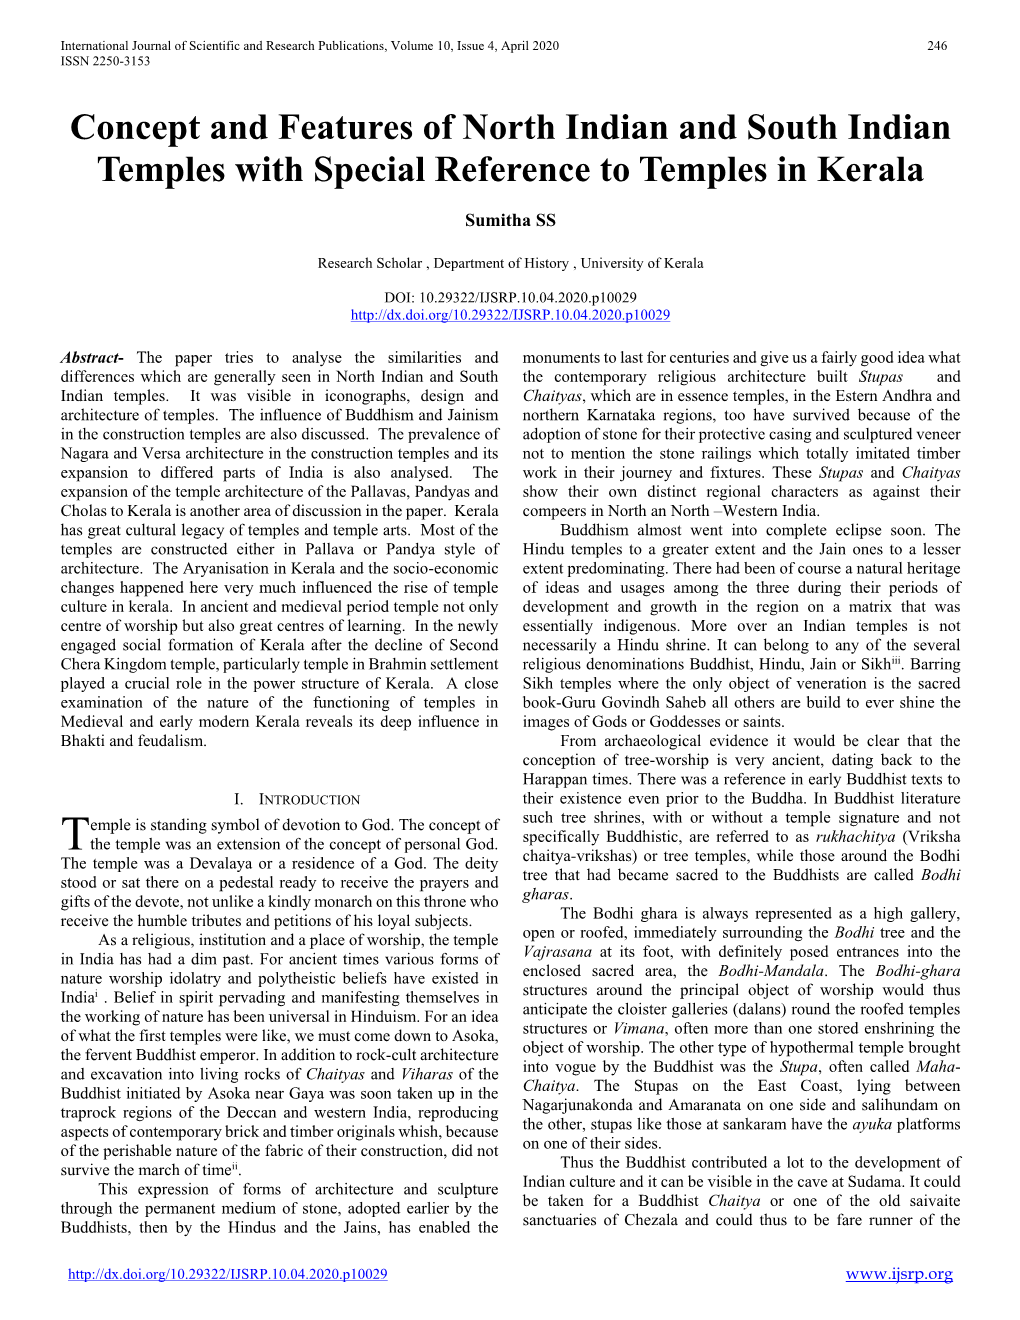 Concept and Features of North Indian and South Indian Temples with Special Reference to Temples in Kerala